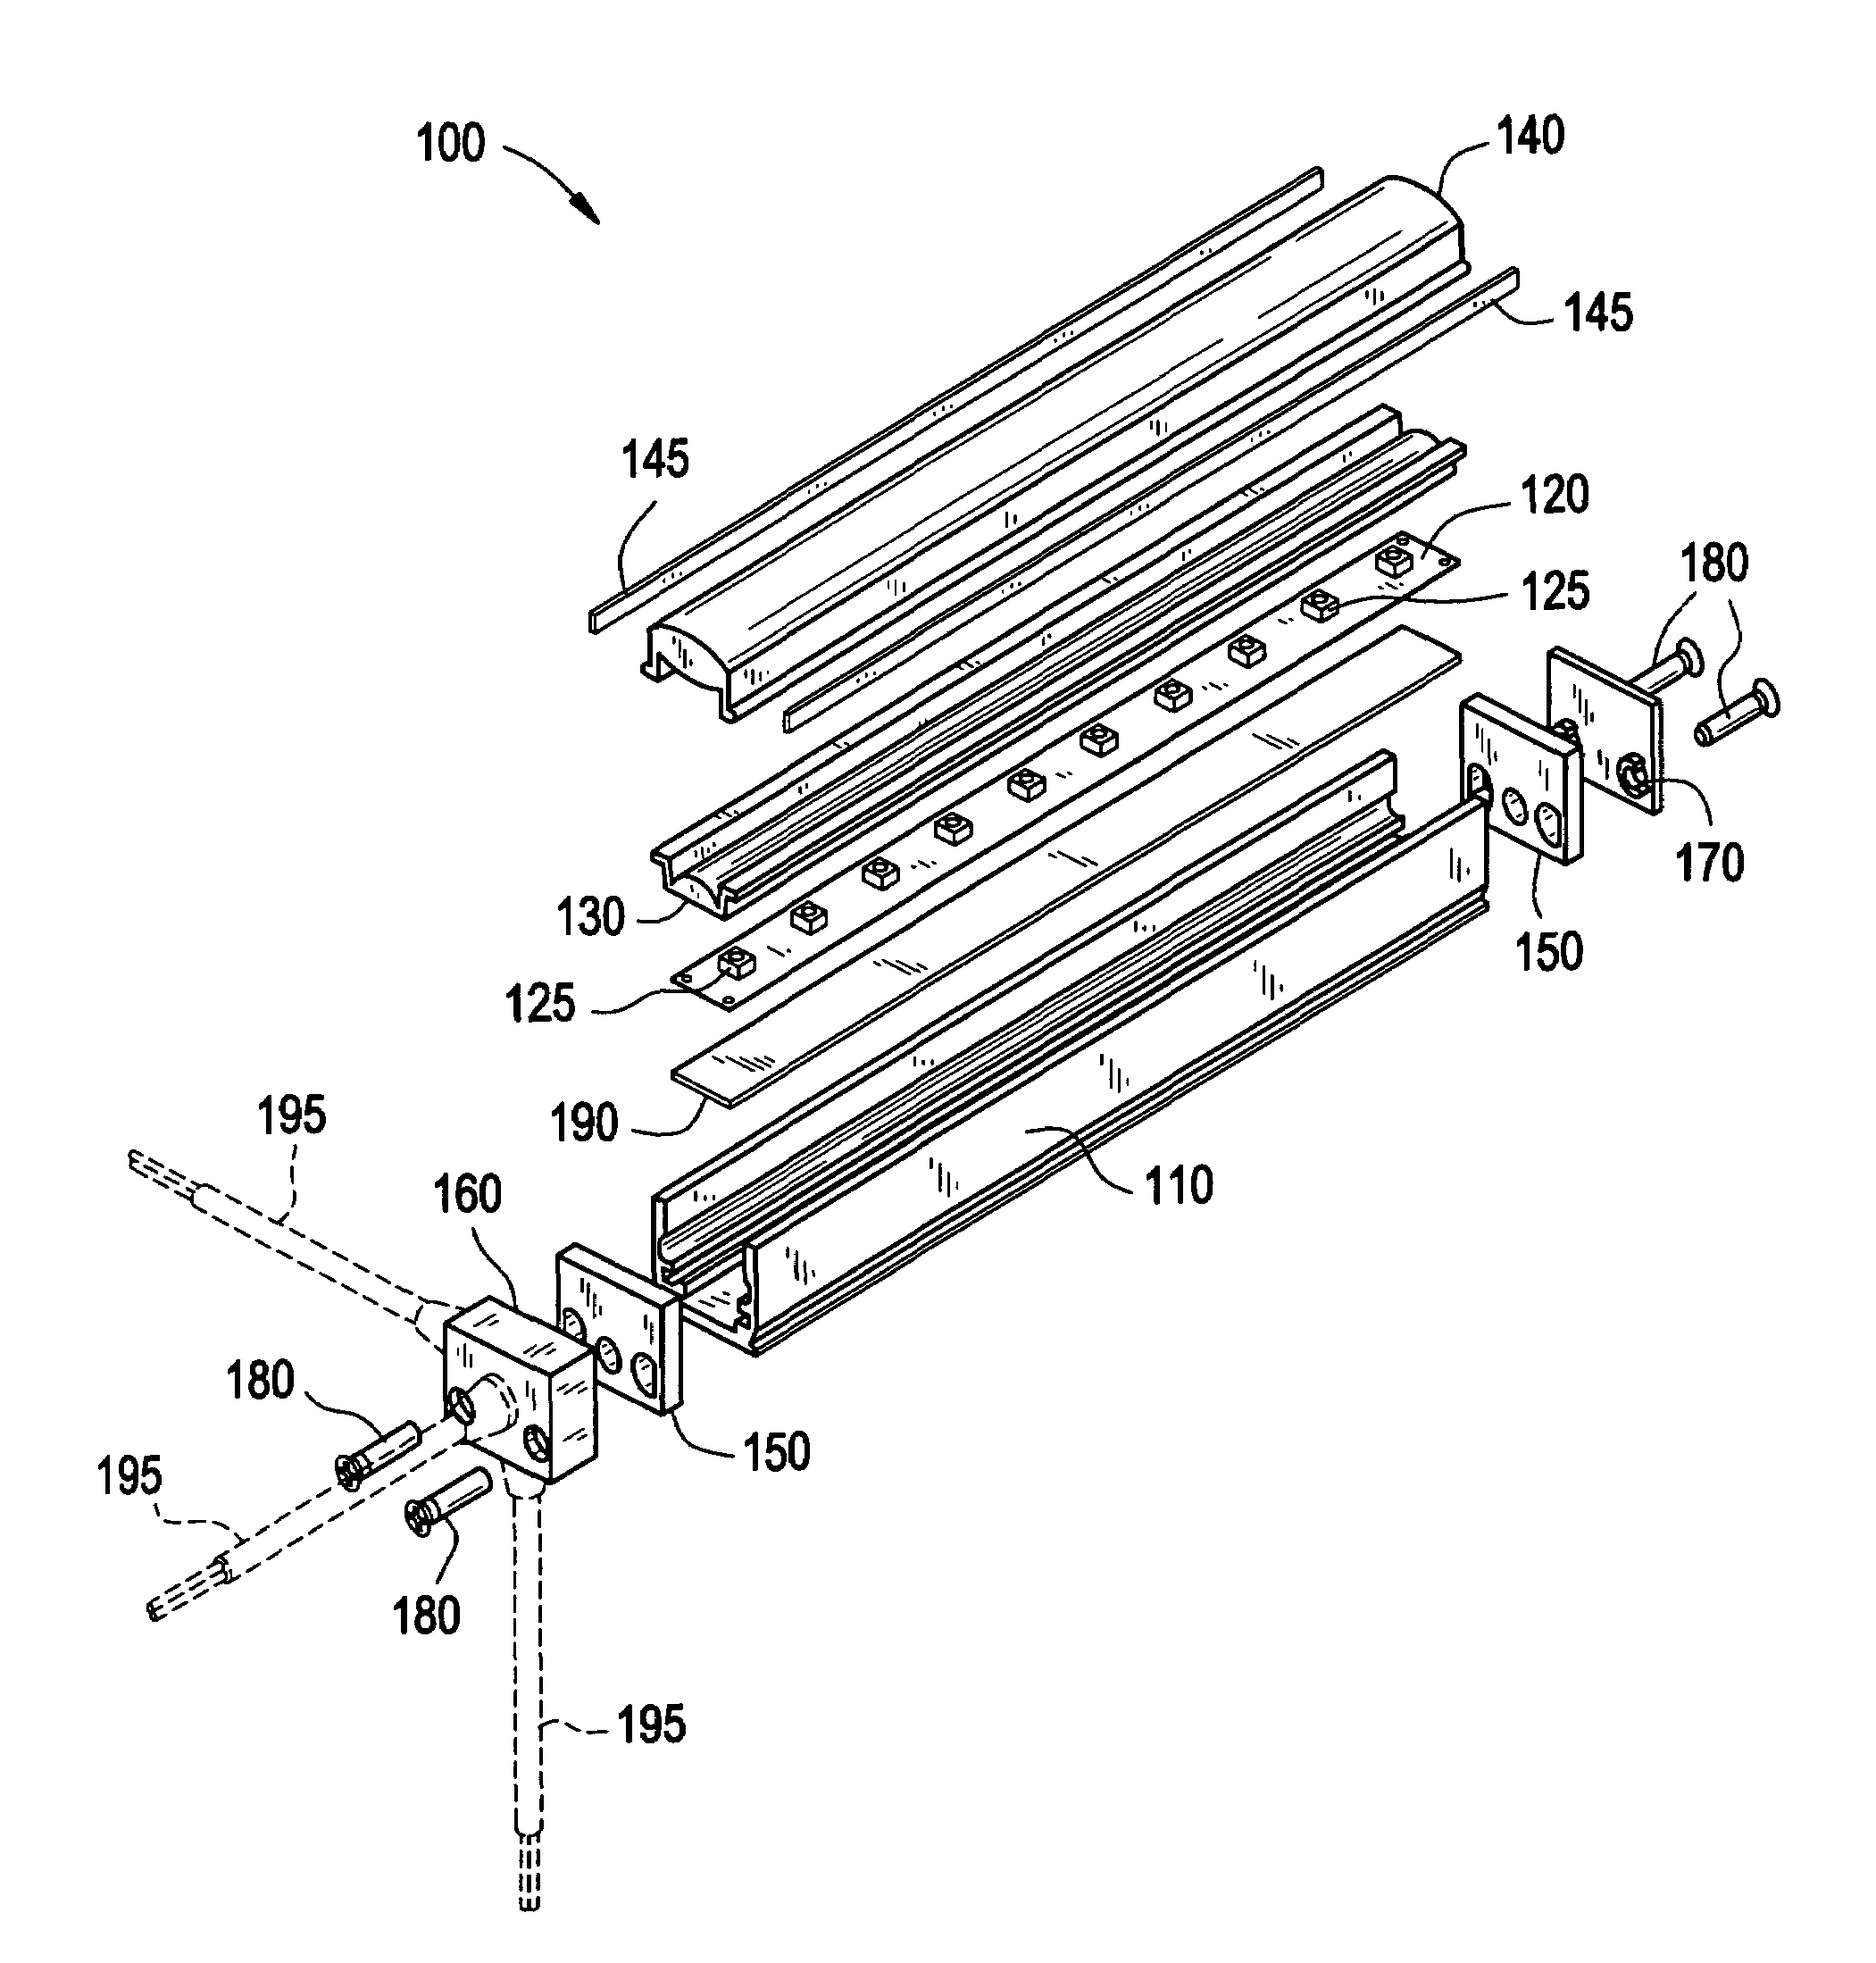 Linear lighting apparatus with increased light-transmission efficiency